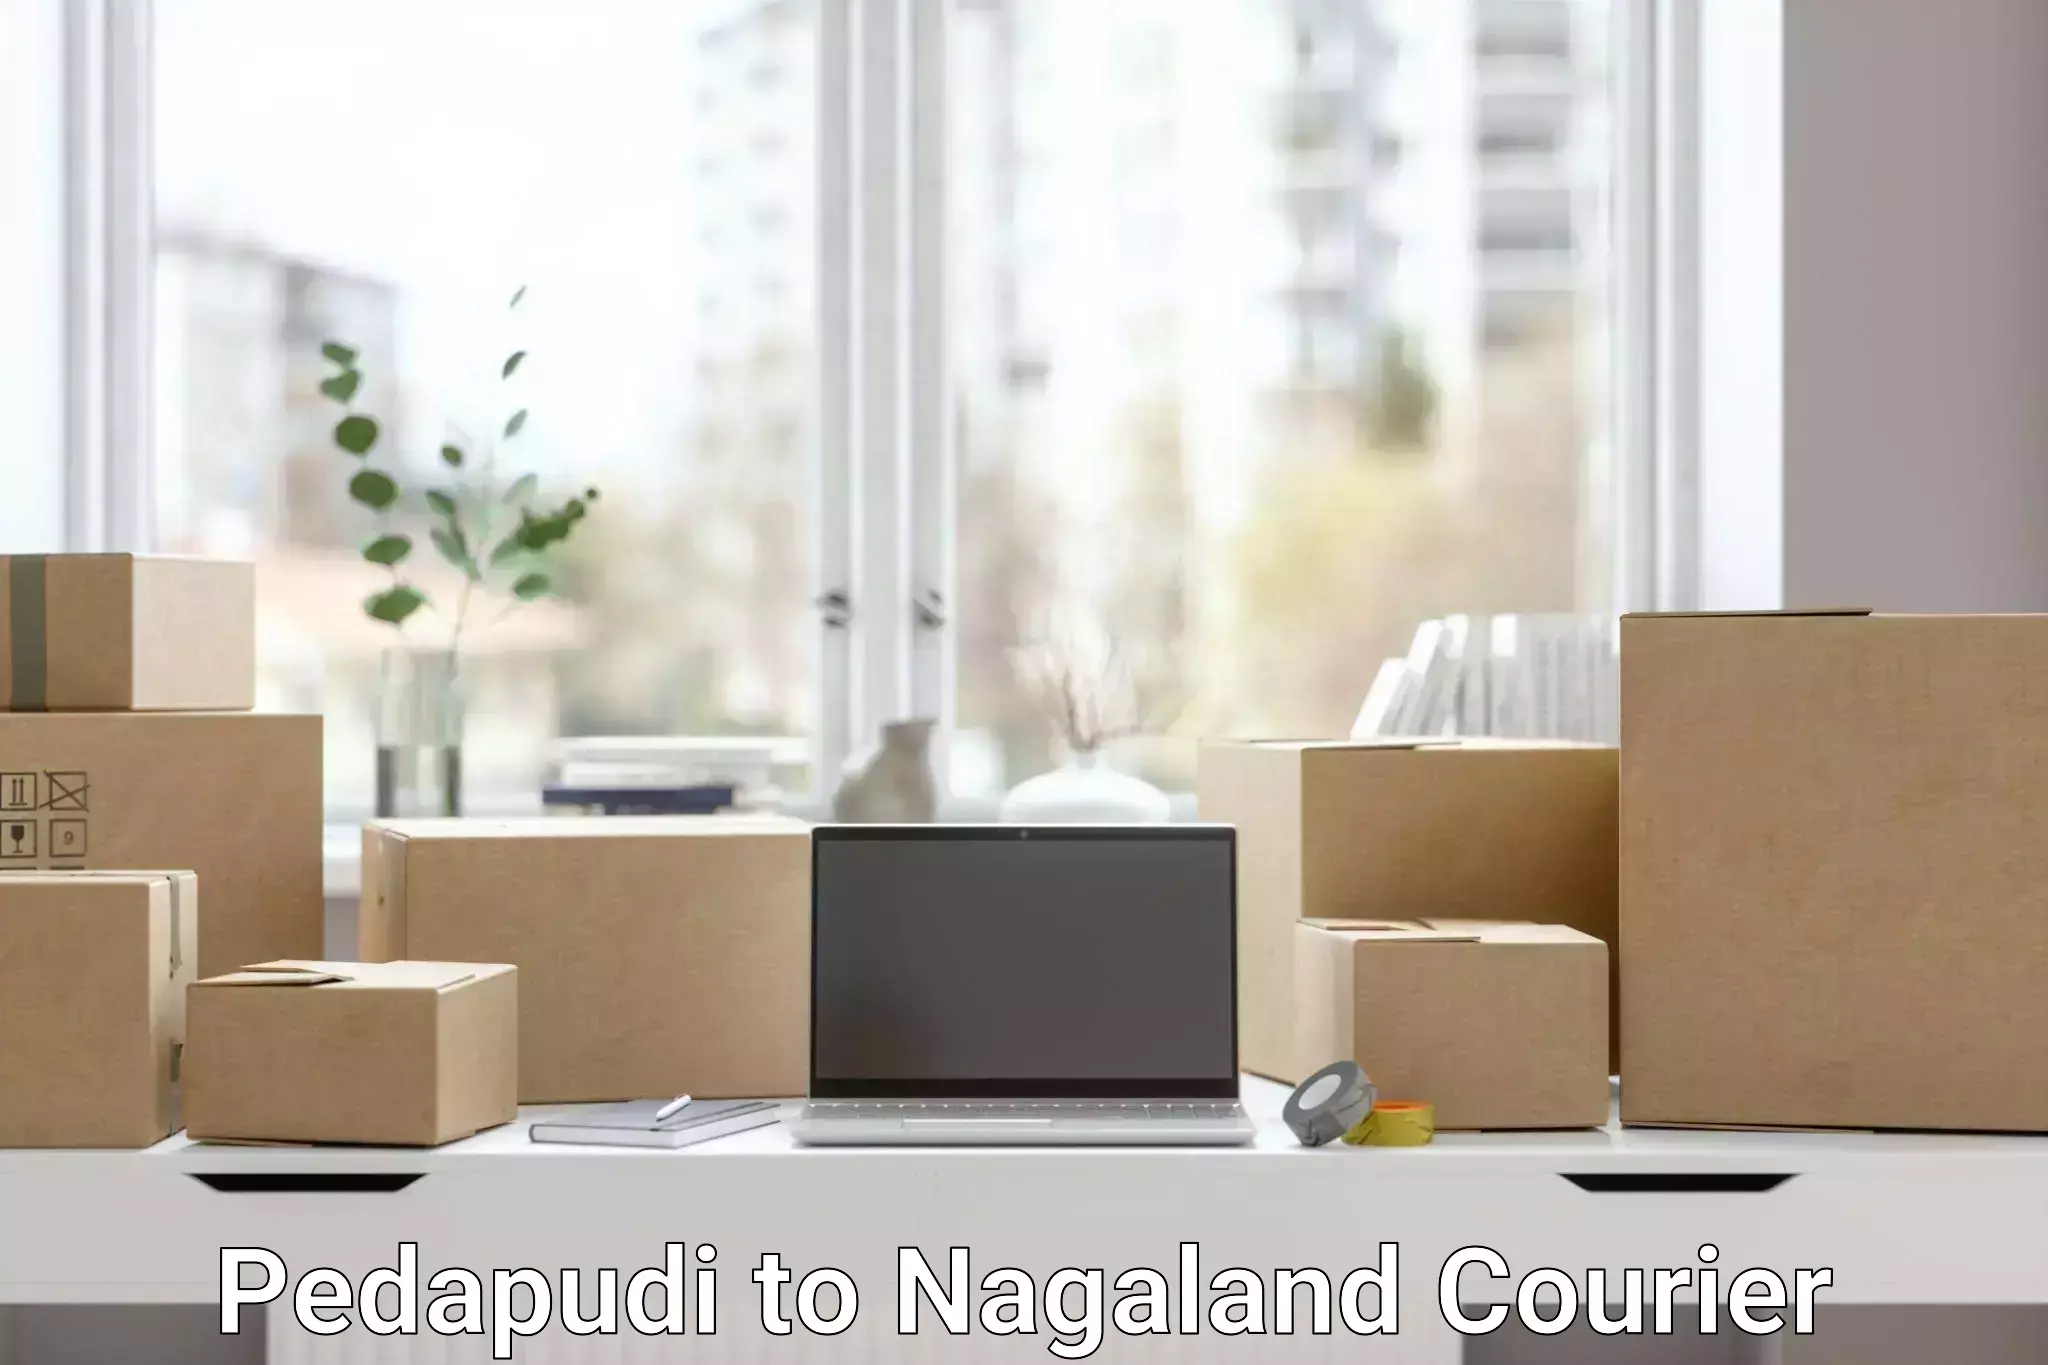 Affordable parcel rates Pedapudi to Nagaland